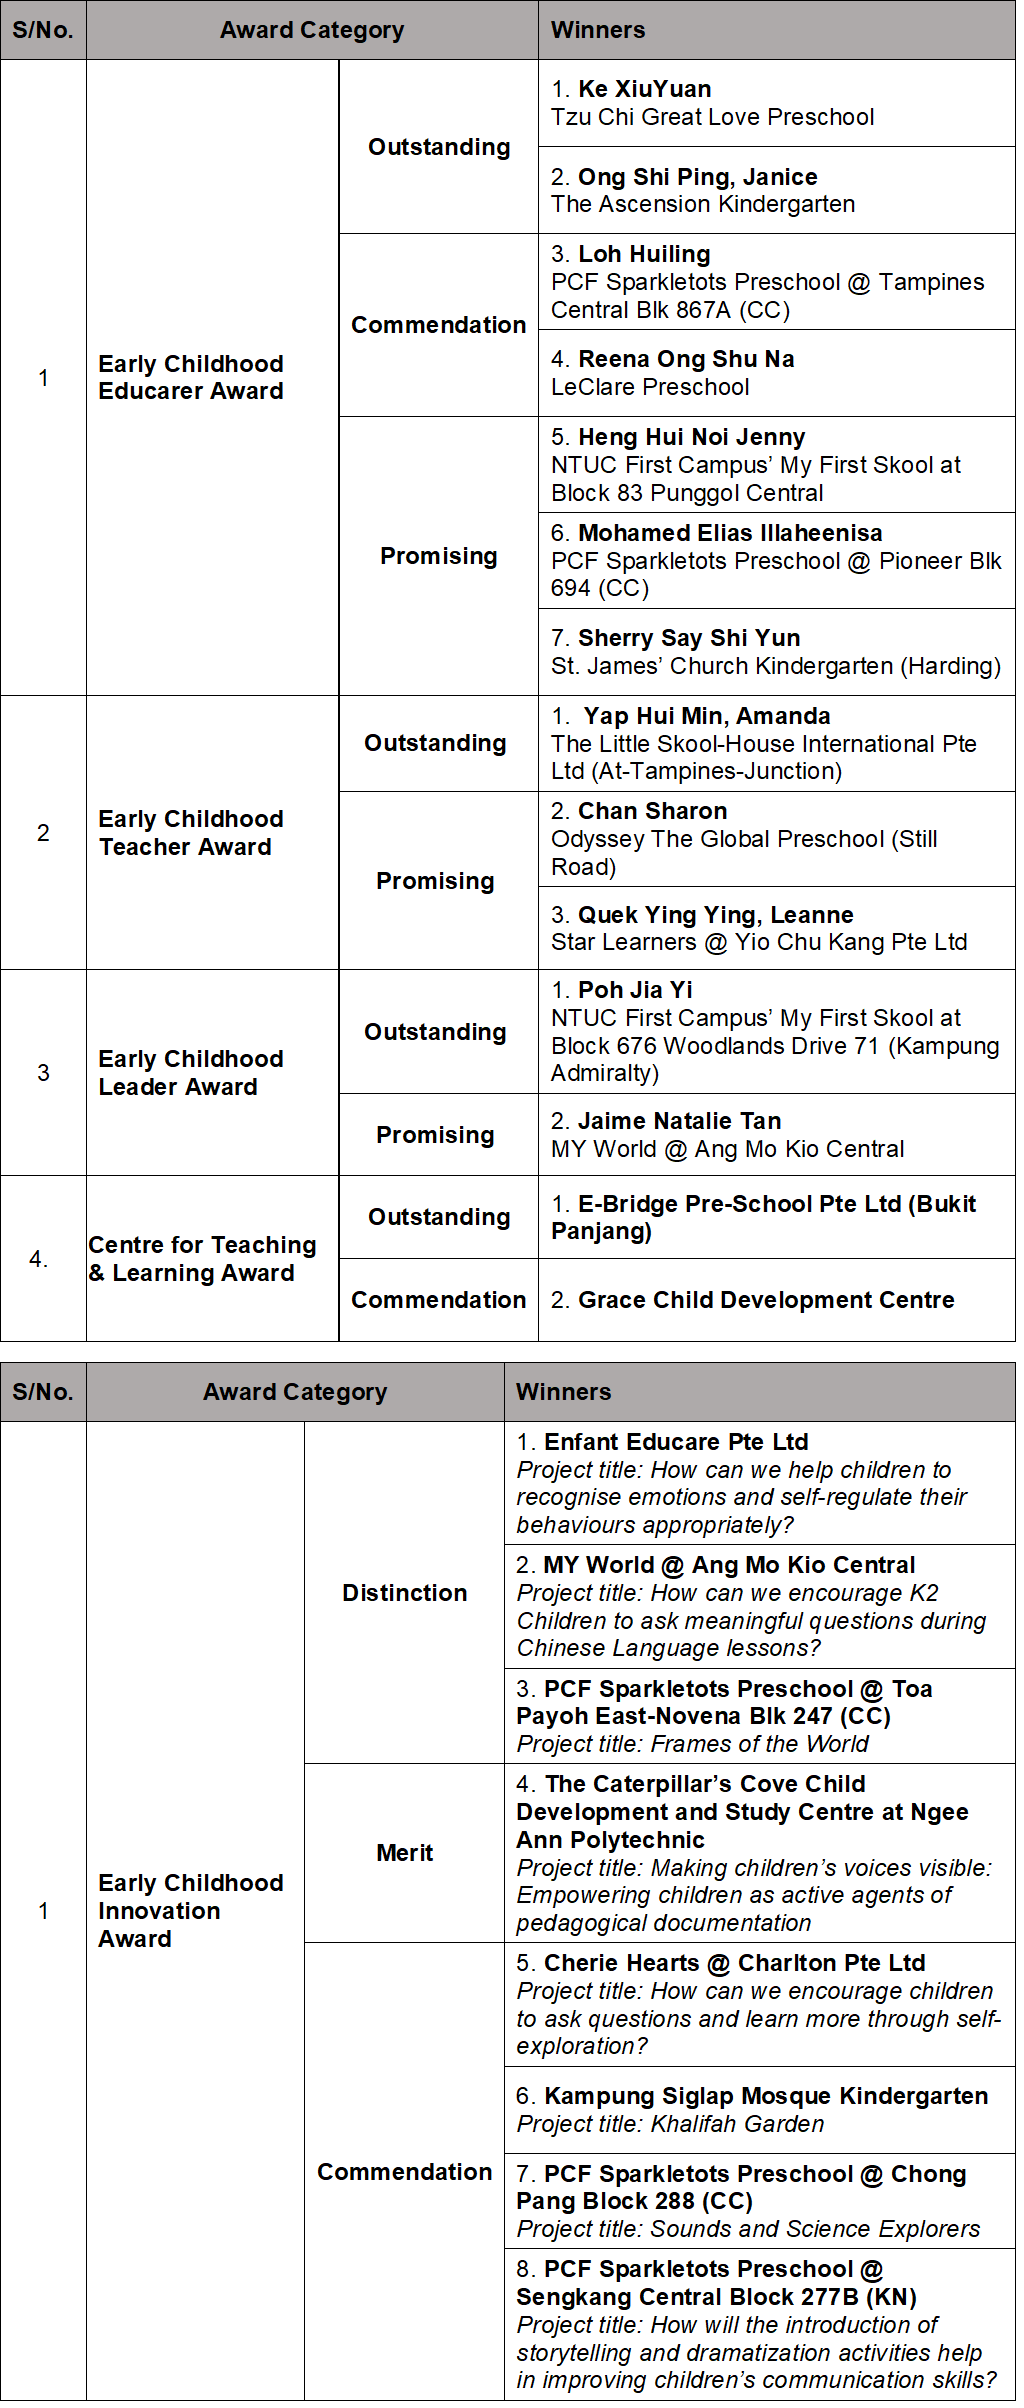 22 Educators and Centres to Receive ECDA Awards for Excellence in Early Childhood Development